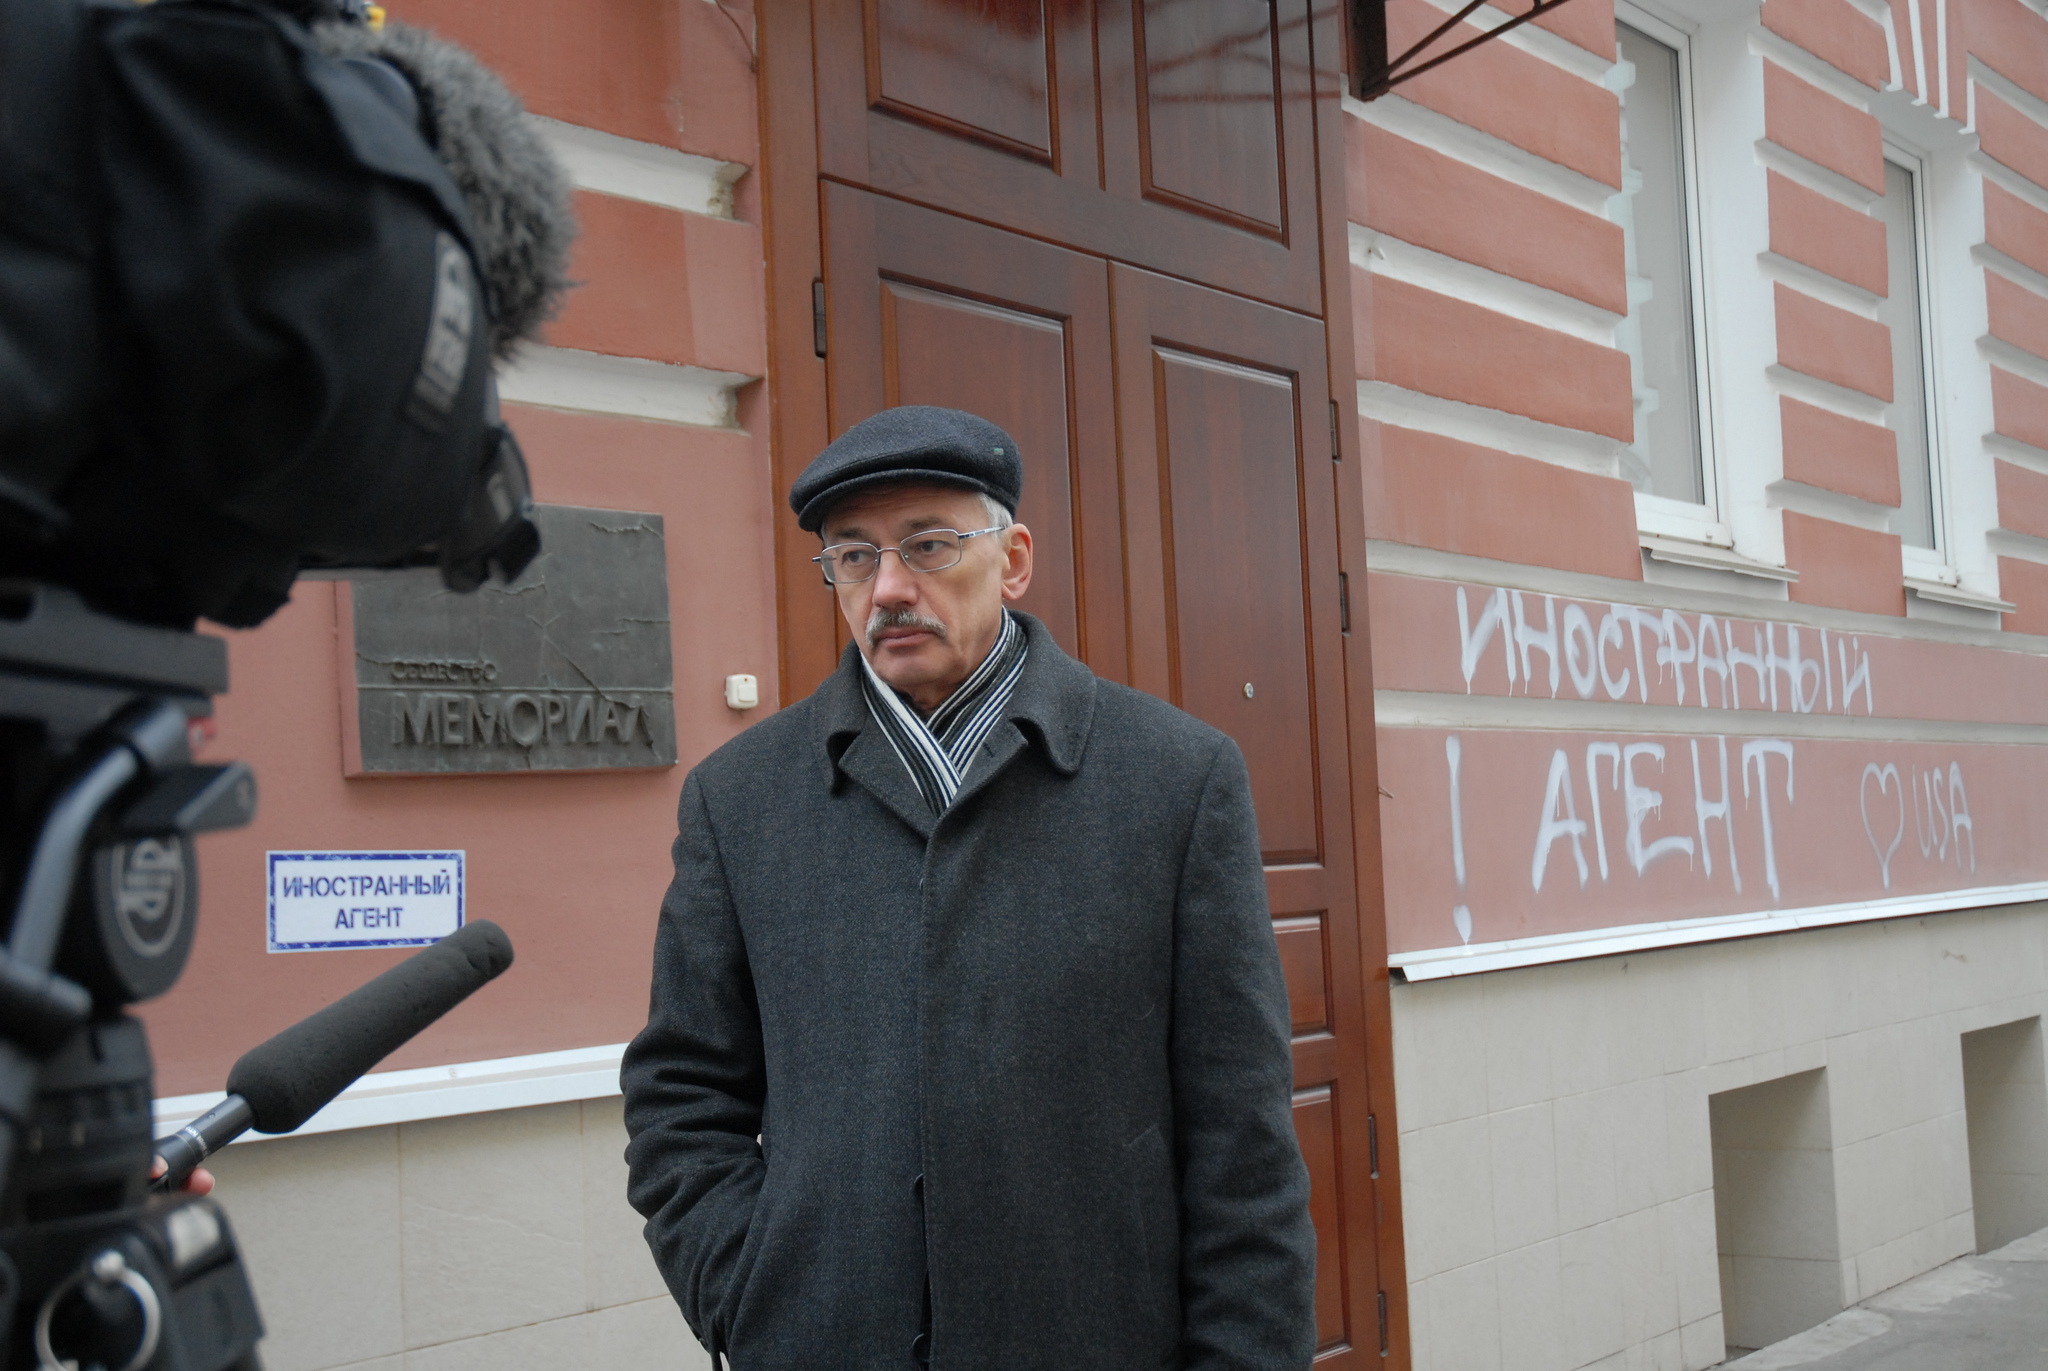 A man stands in front of a building with the words "foreign agent" painted on it.